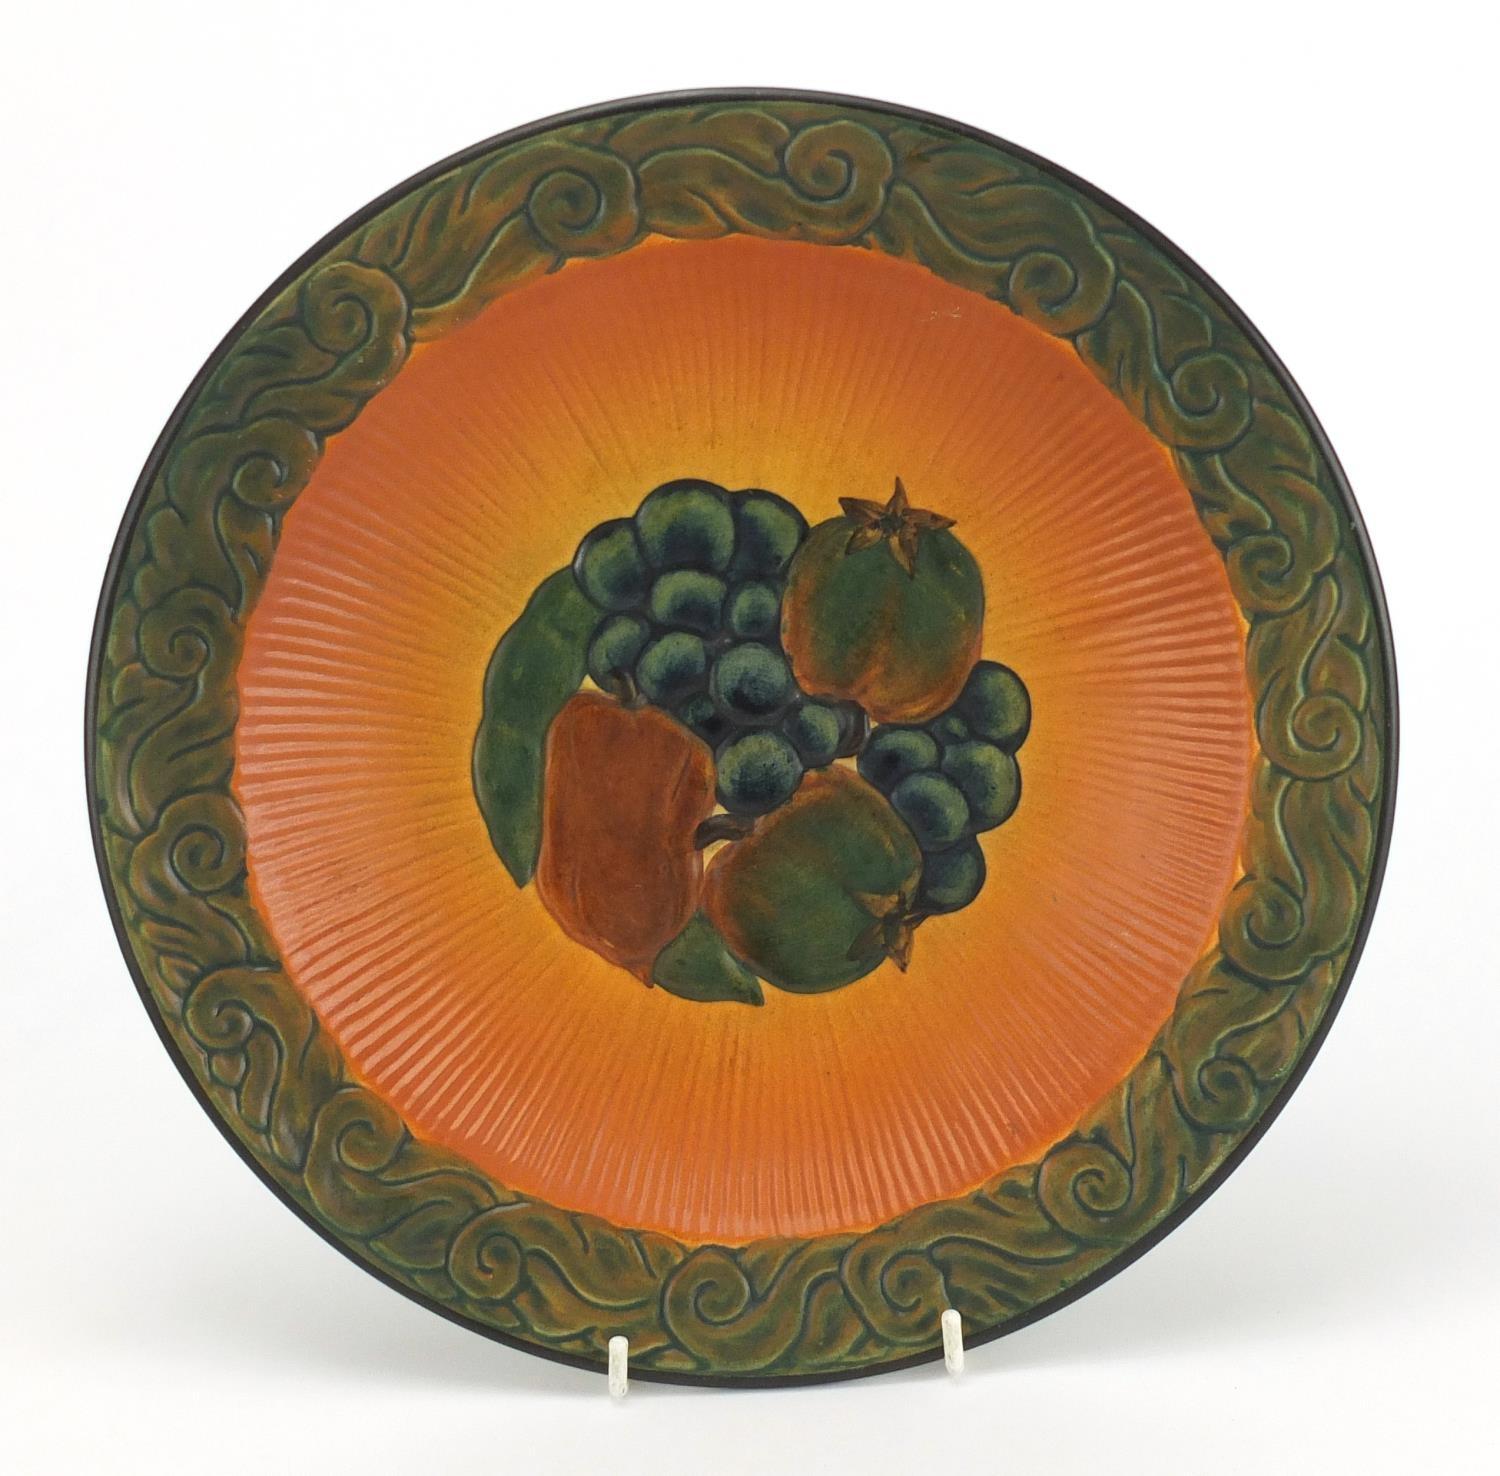 Danish pottery dish by Peter Ipsens Enke, hand painted and decorated in relief with fruit, impressed